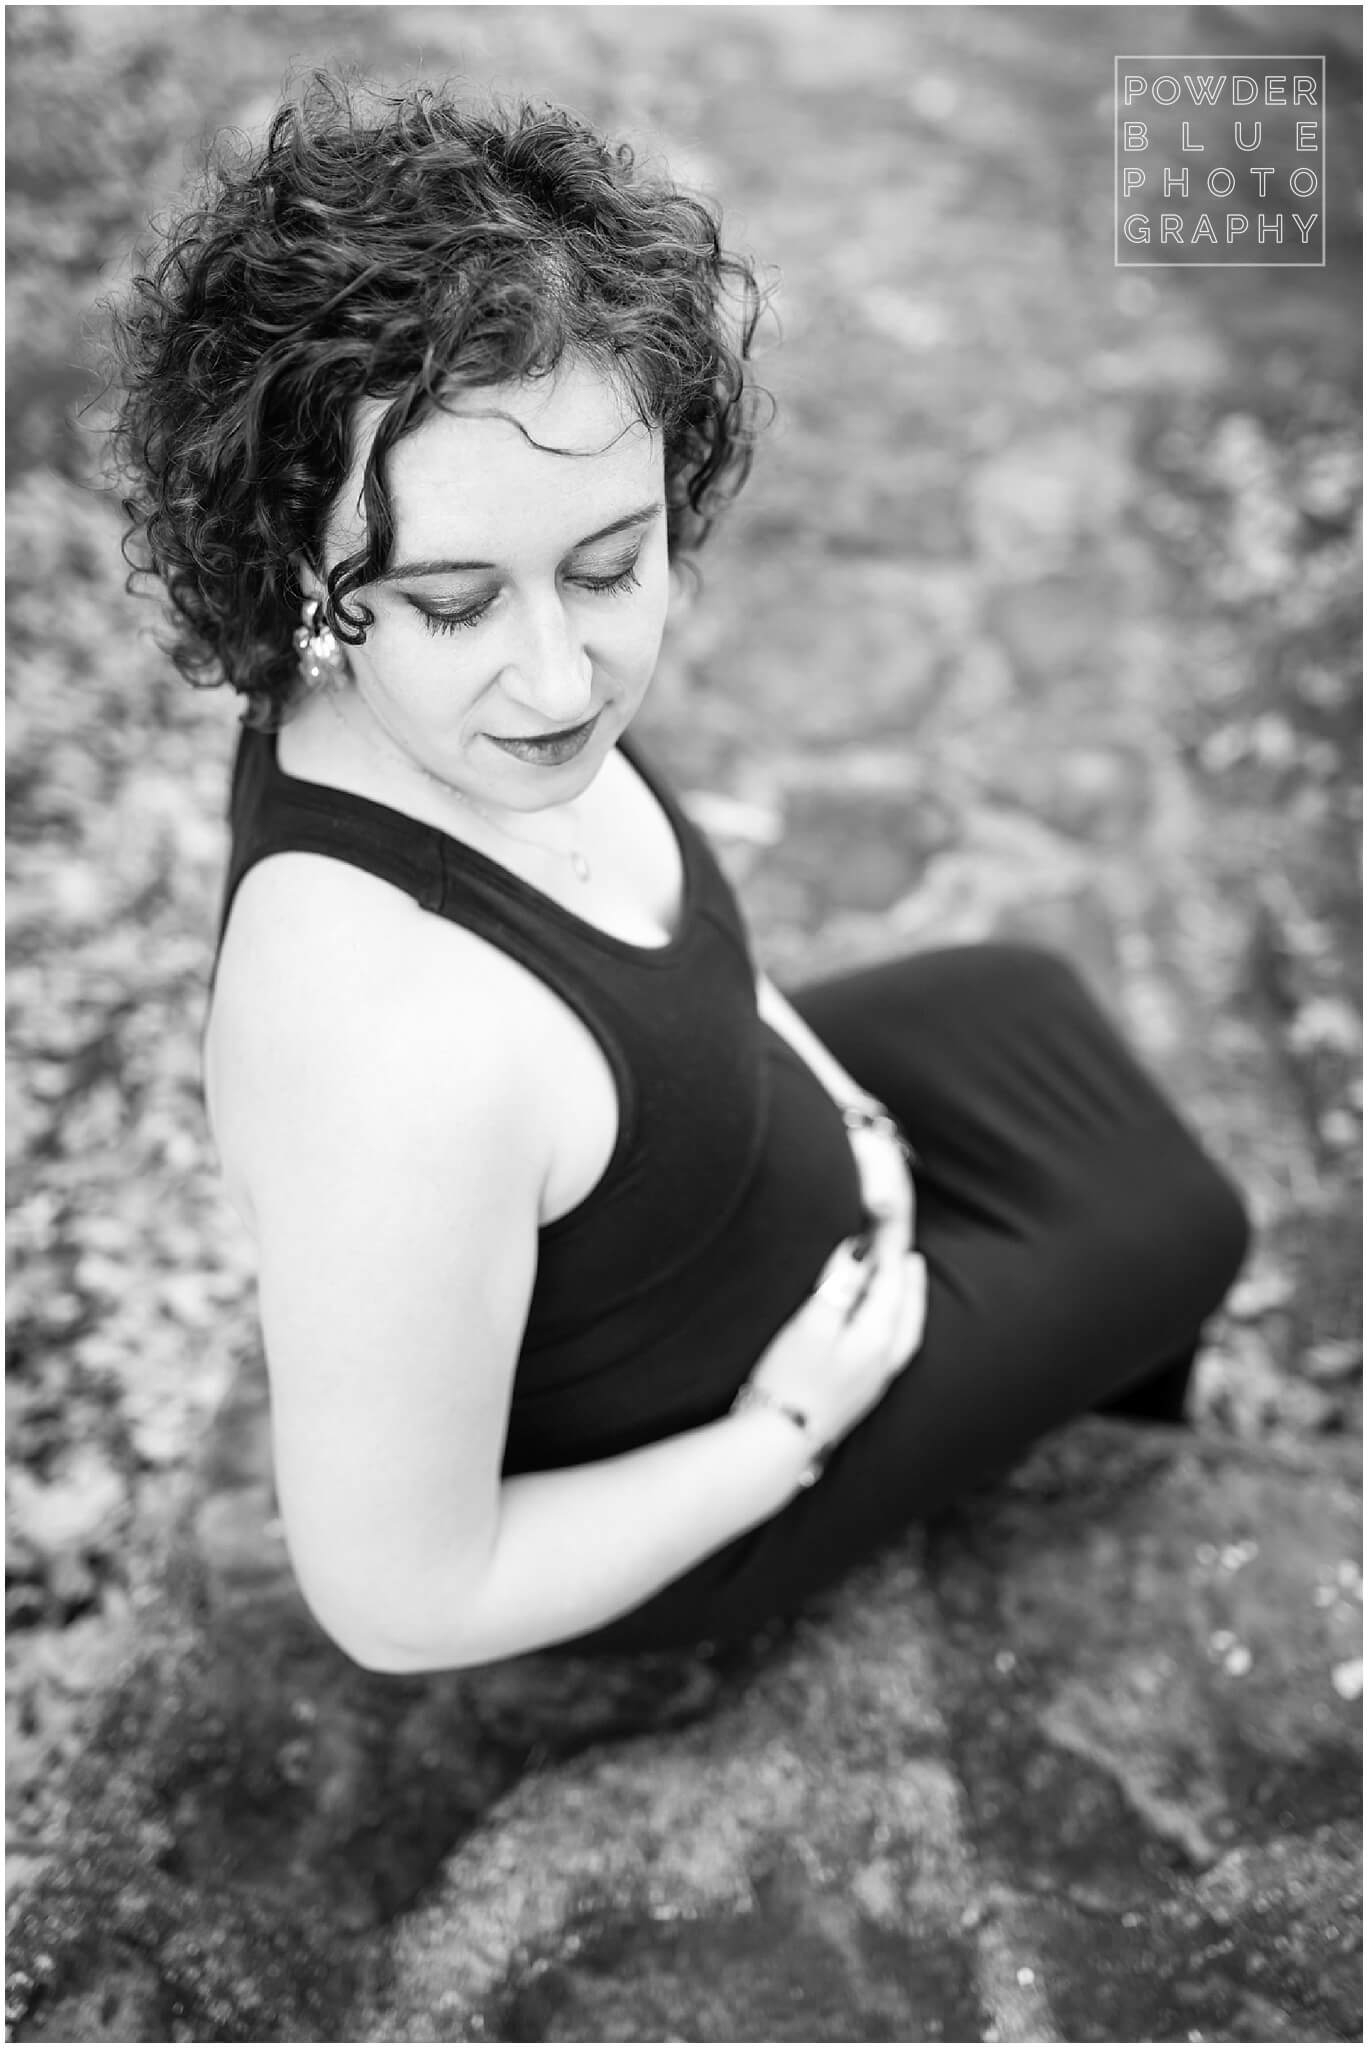 pittsburgh maternity photography session. brookline neighborhood. 7 months pregnant.